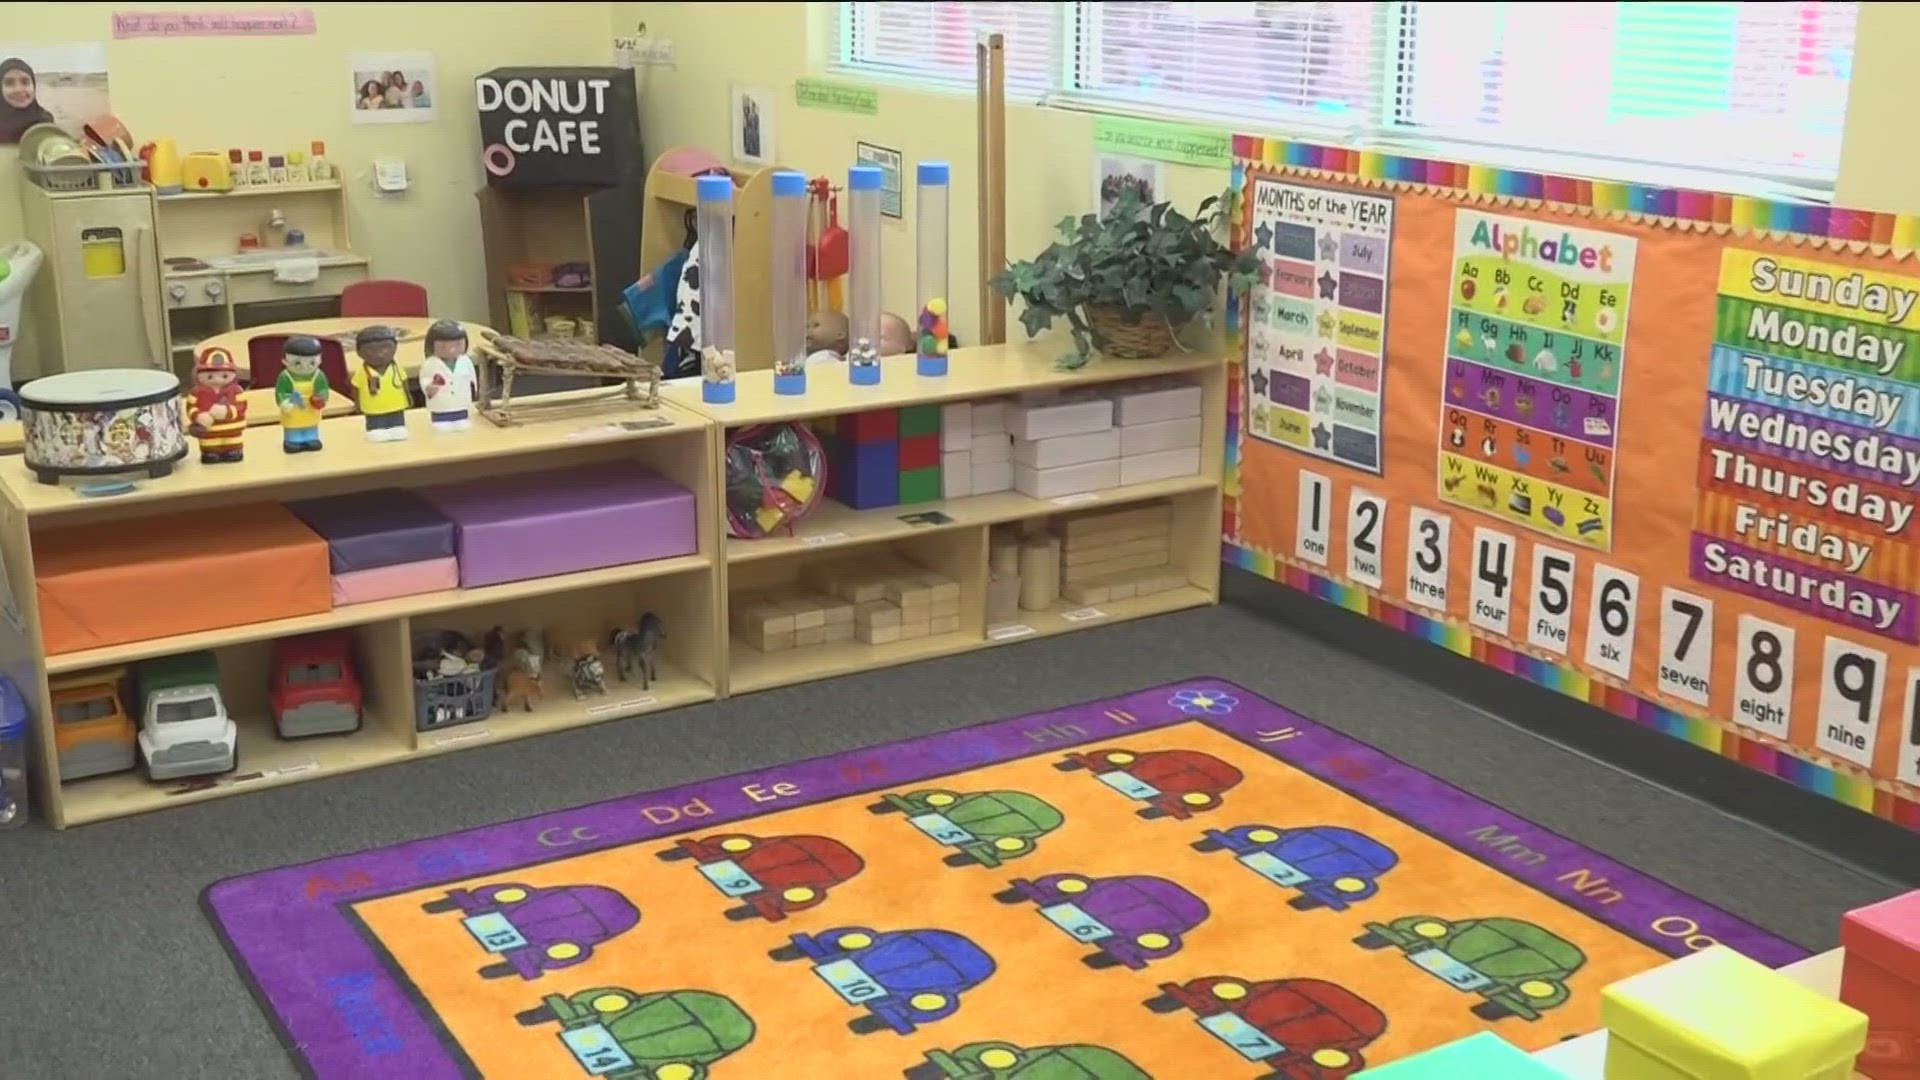 The program gives childcare workers tuition to help their own children.